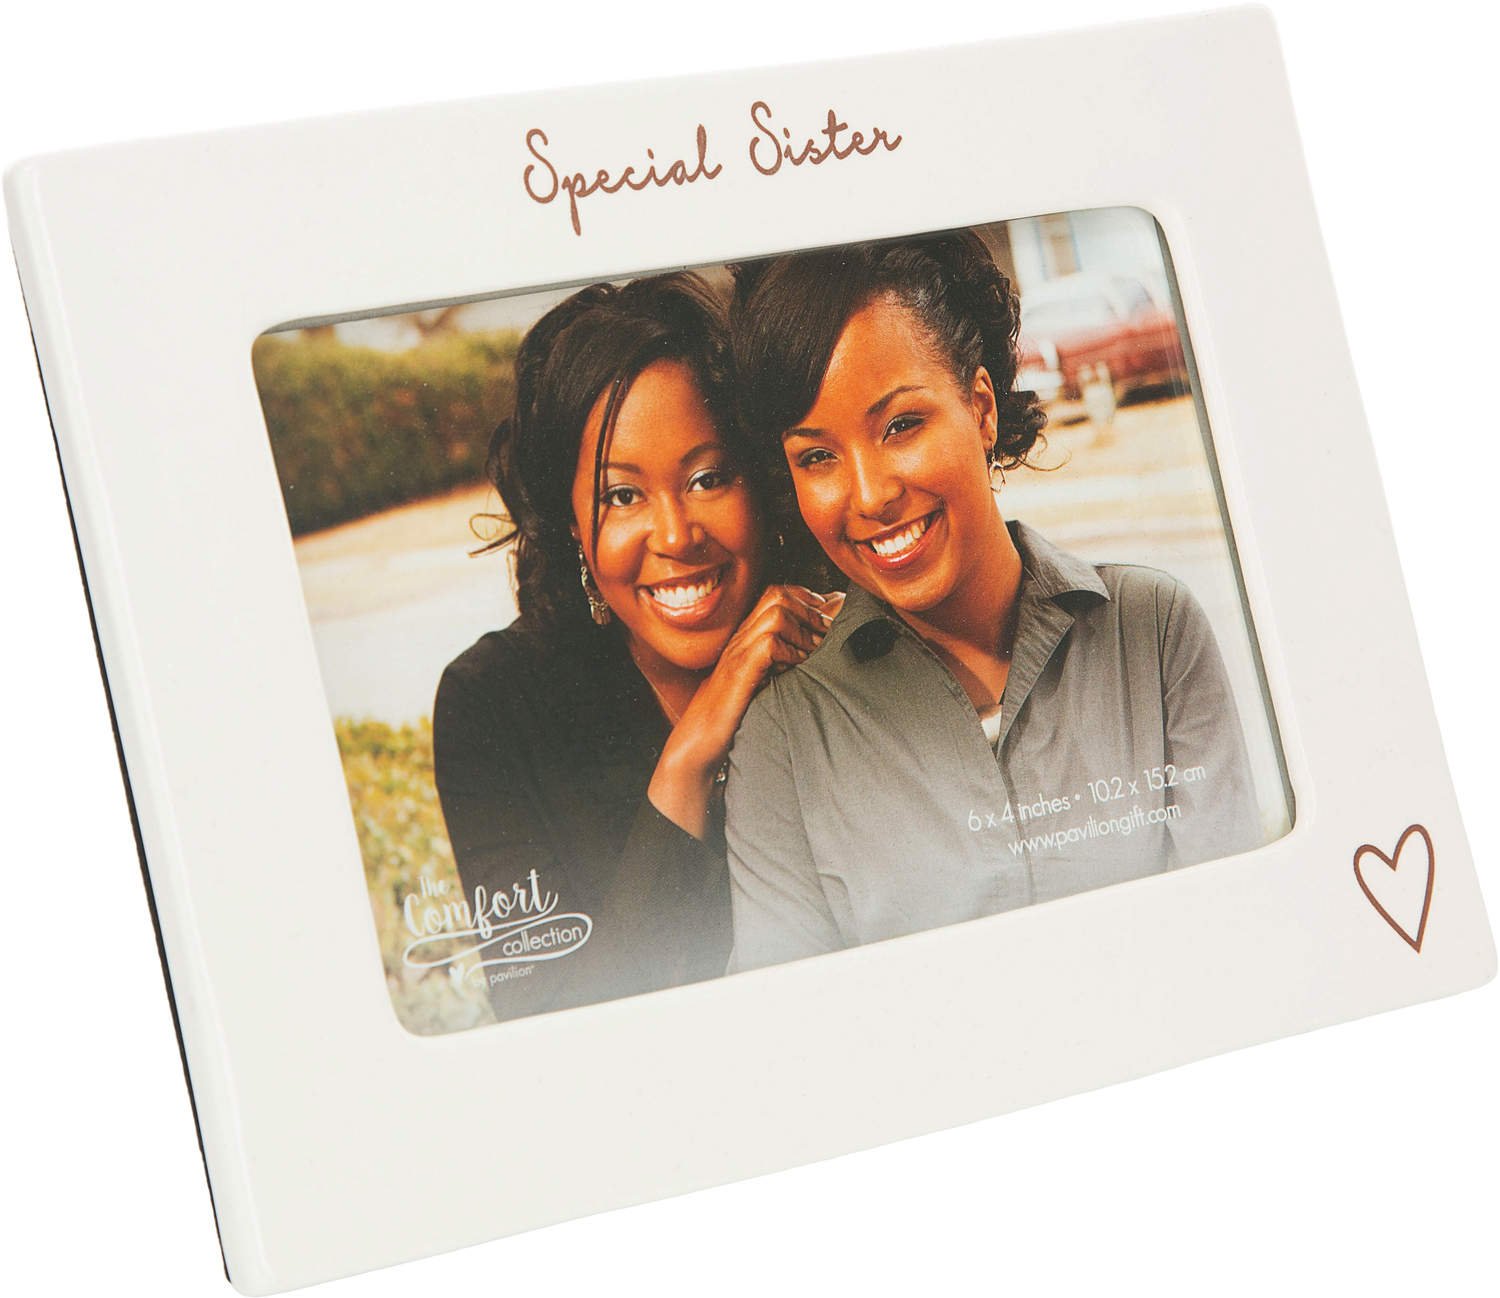 Special Sister by Comfort Collection - Special Sister - 7.5" x 5.5" Ceramic Frame (Holds a 6" x 4" Photo)